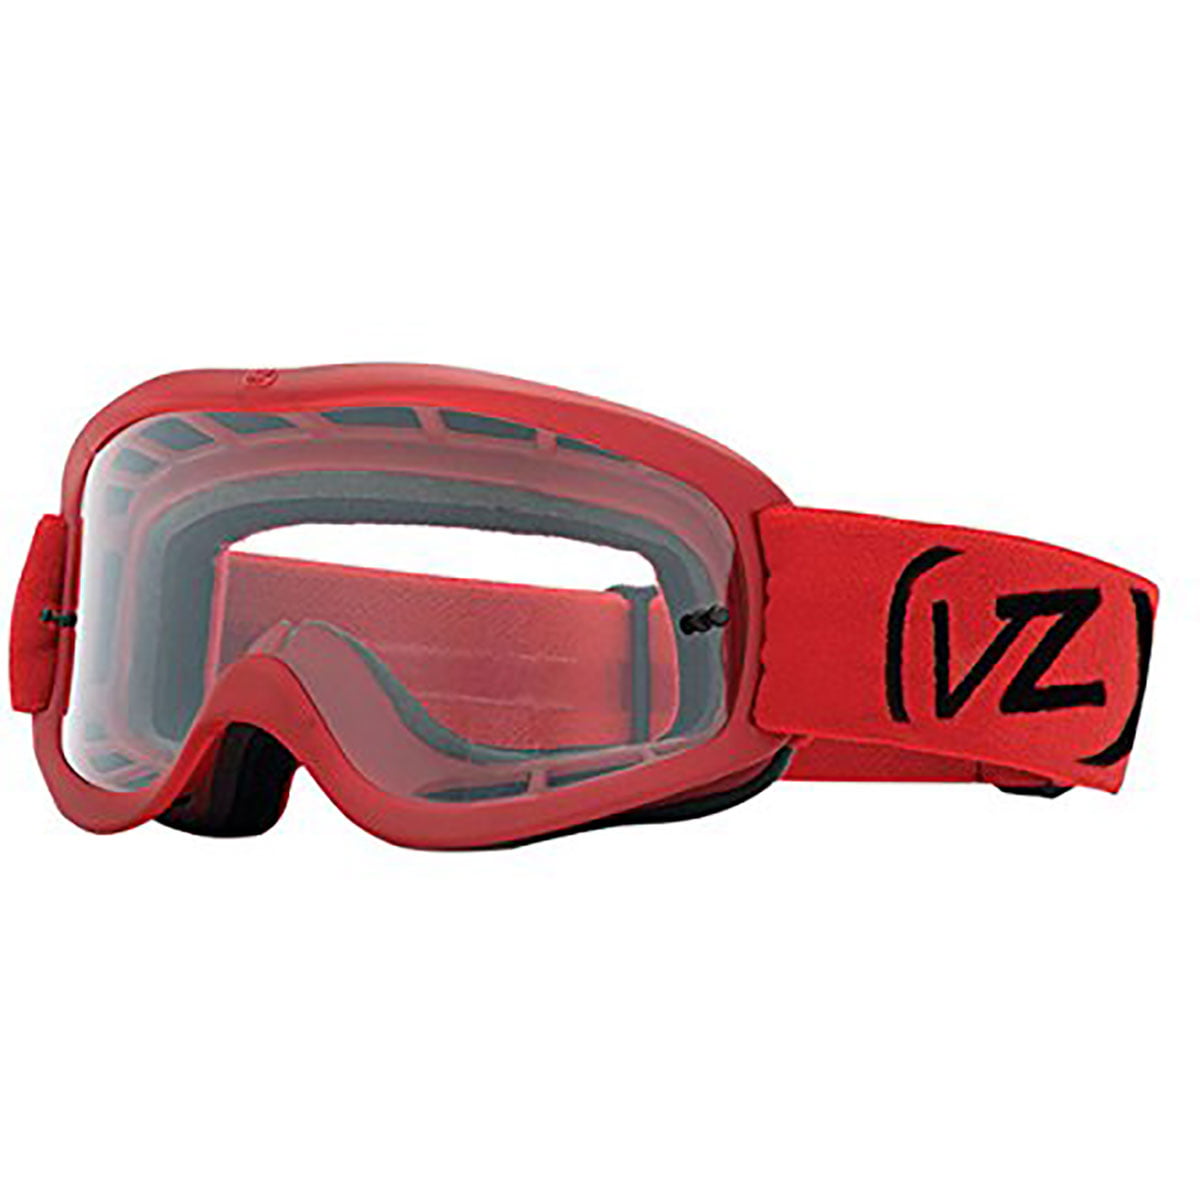 VonZipper Beefy MX Adult Off-Road Motorcycle Goggles Eyewear Black Smoke One Size Fits All 